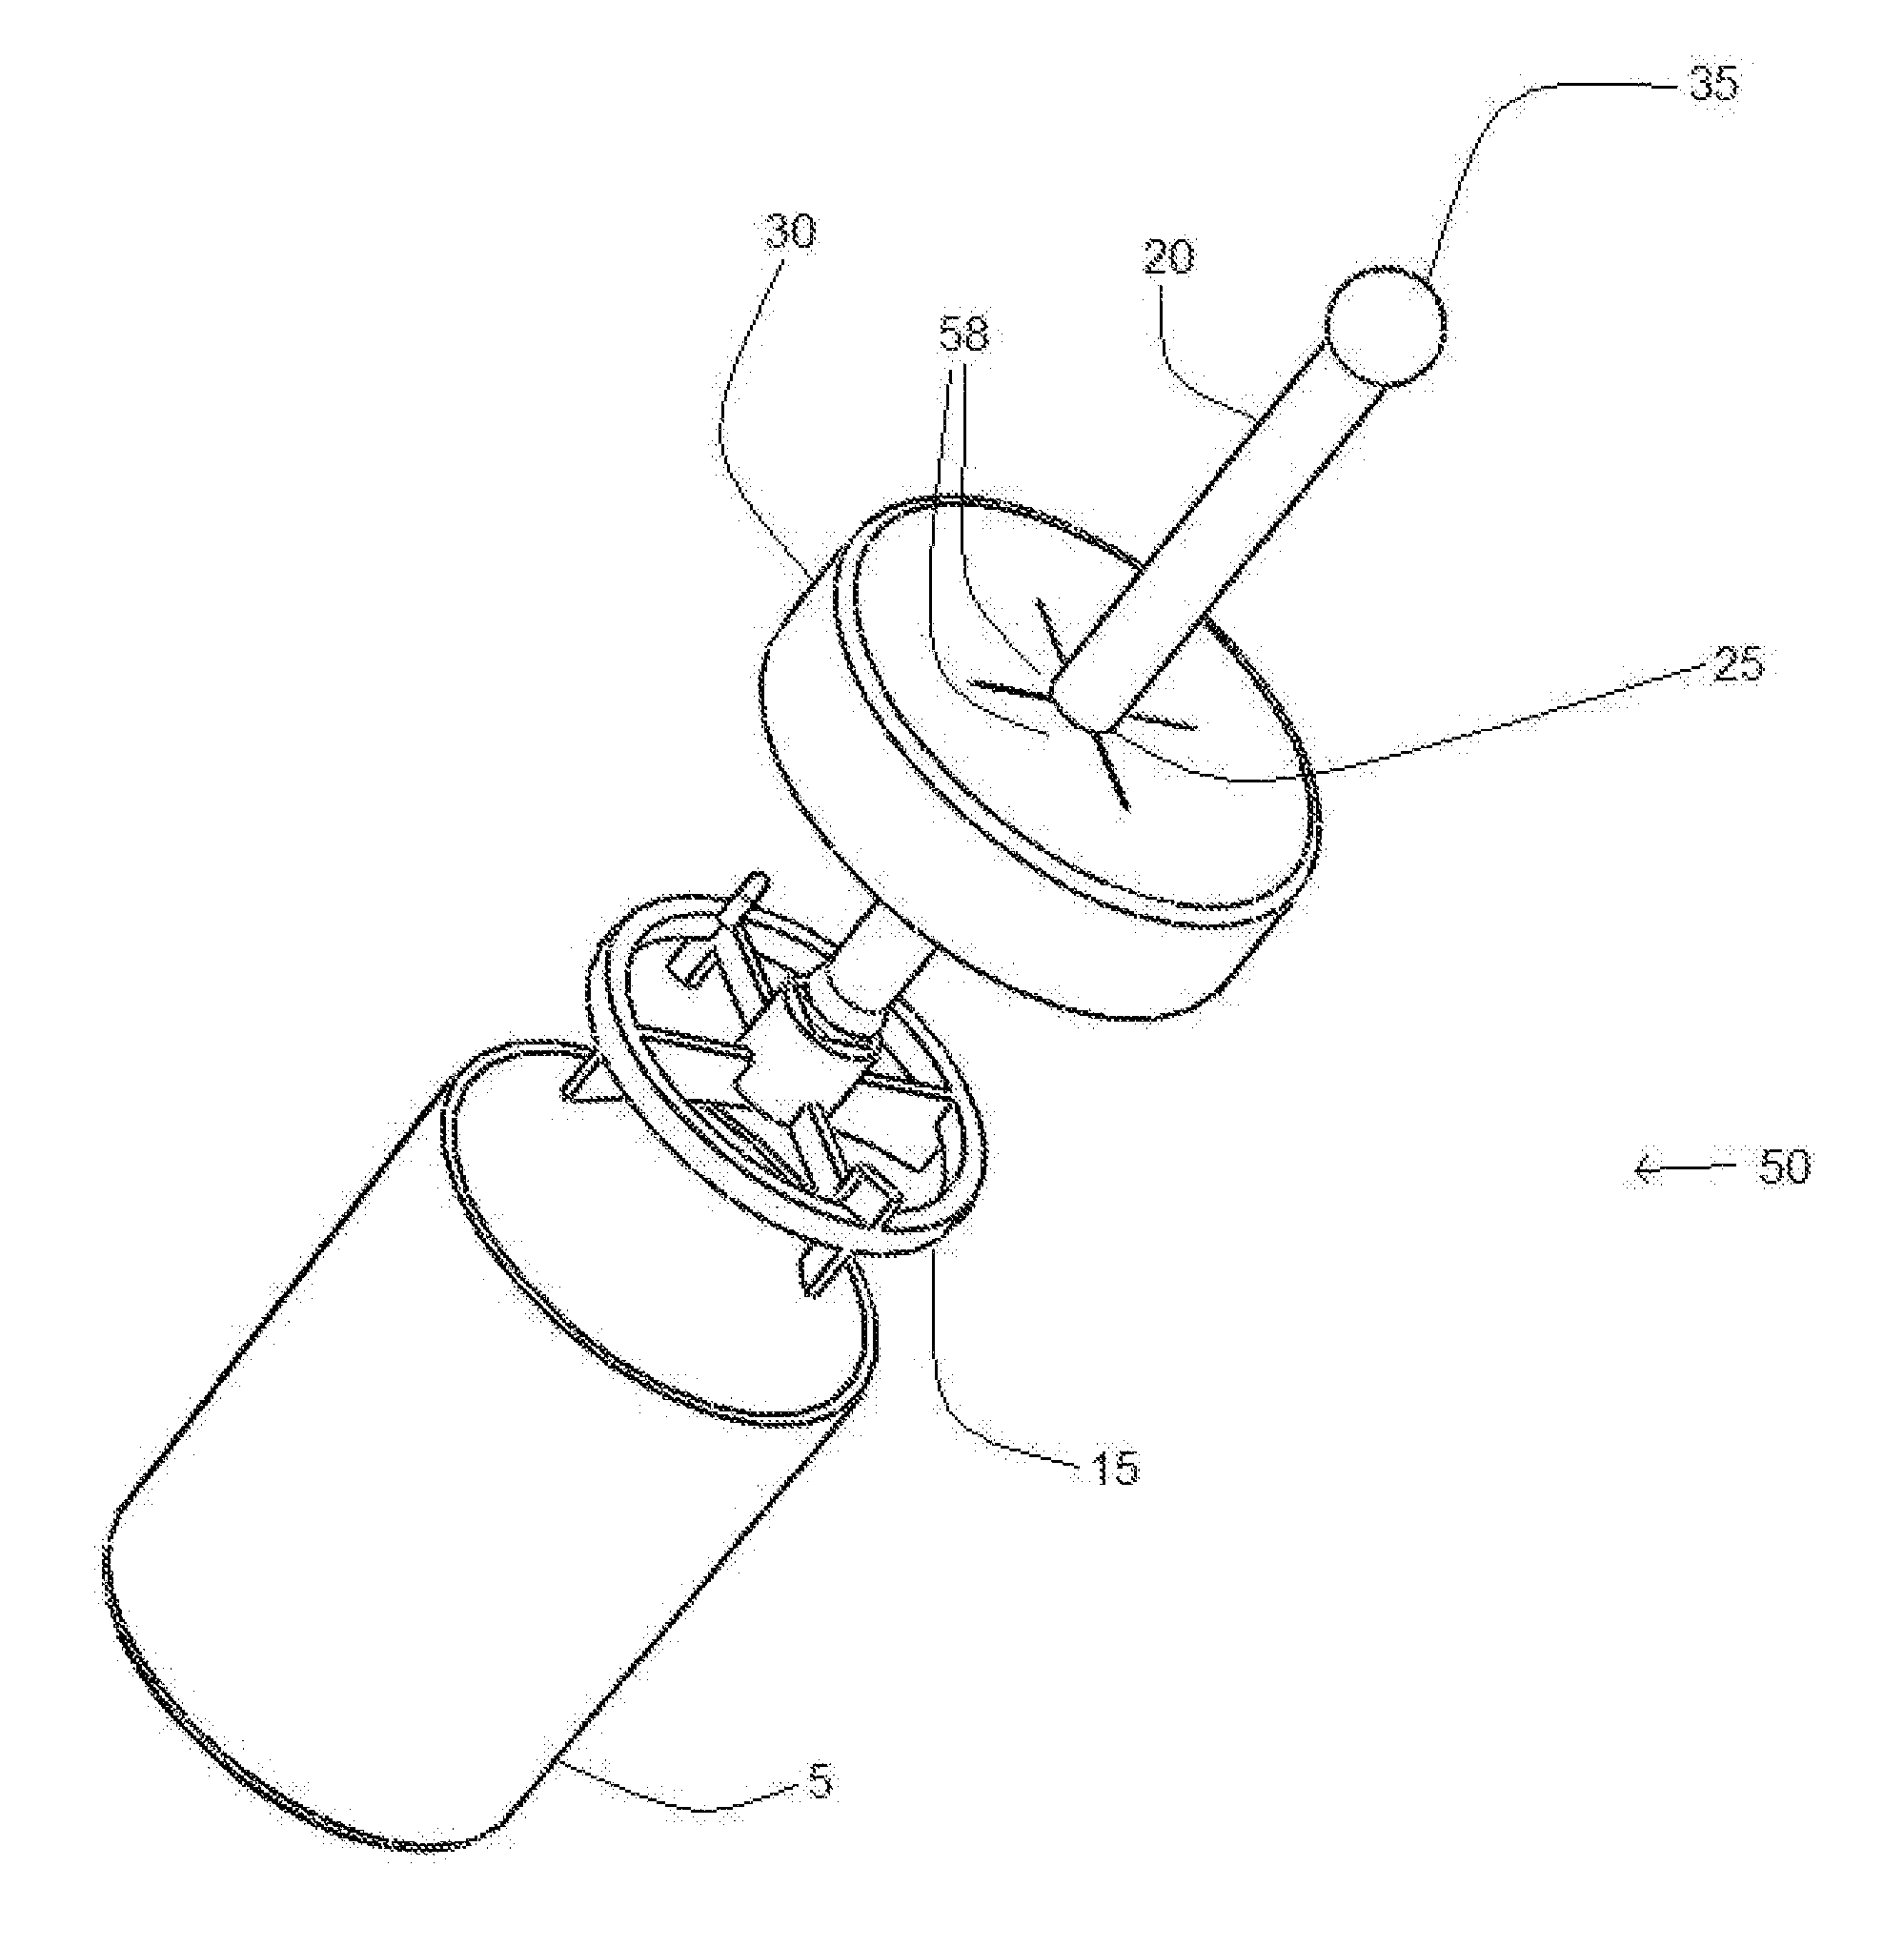 Systems and methods for mixing and dispensing flowable materials